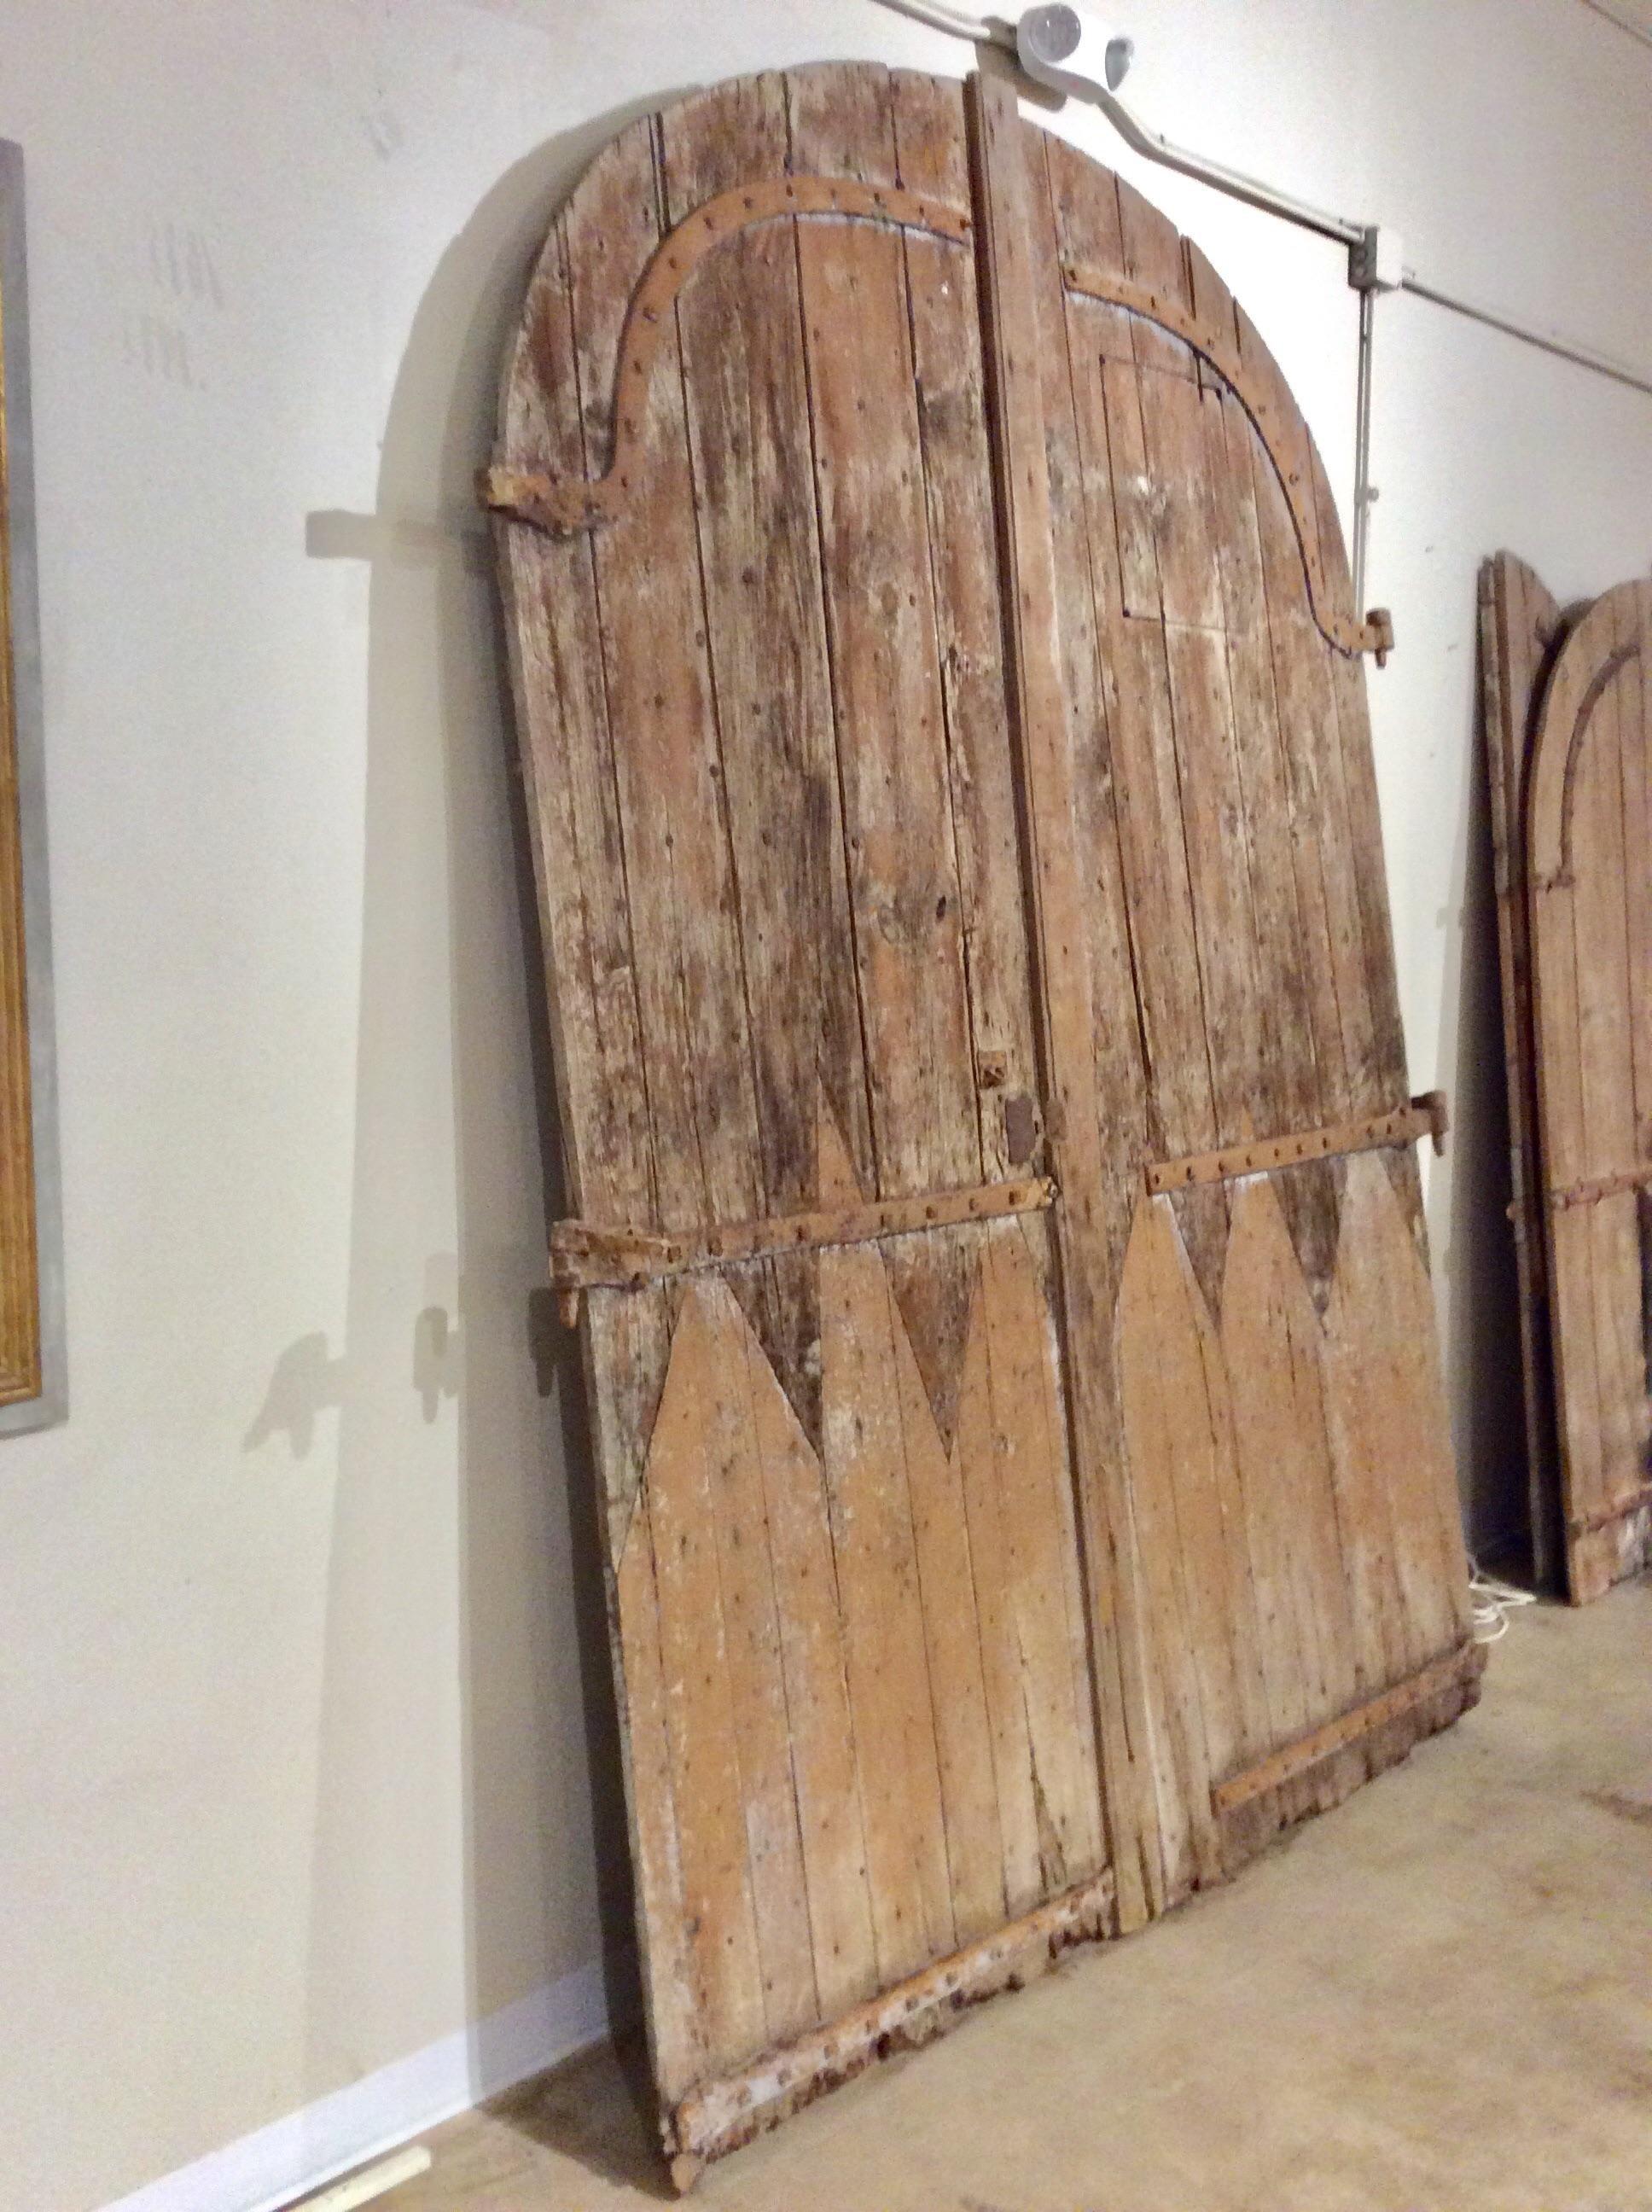 Found in the South of France, these monumental Early 1800s French Arched Wood Doors were salvaged from a 19th century French chateau. They would have been on the ground floor, attached to the building. Each door is made of mixed wood, pine and oak,